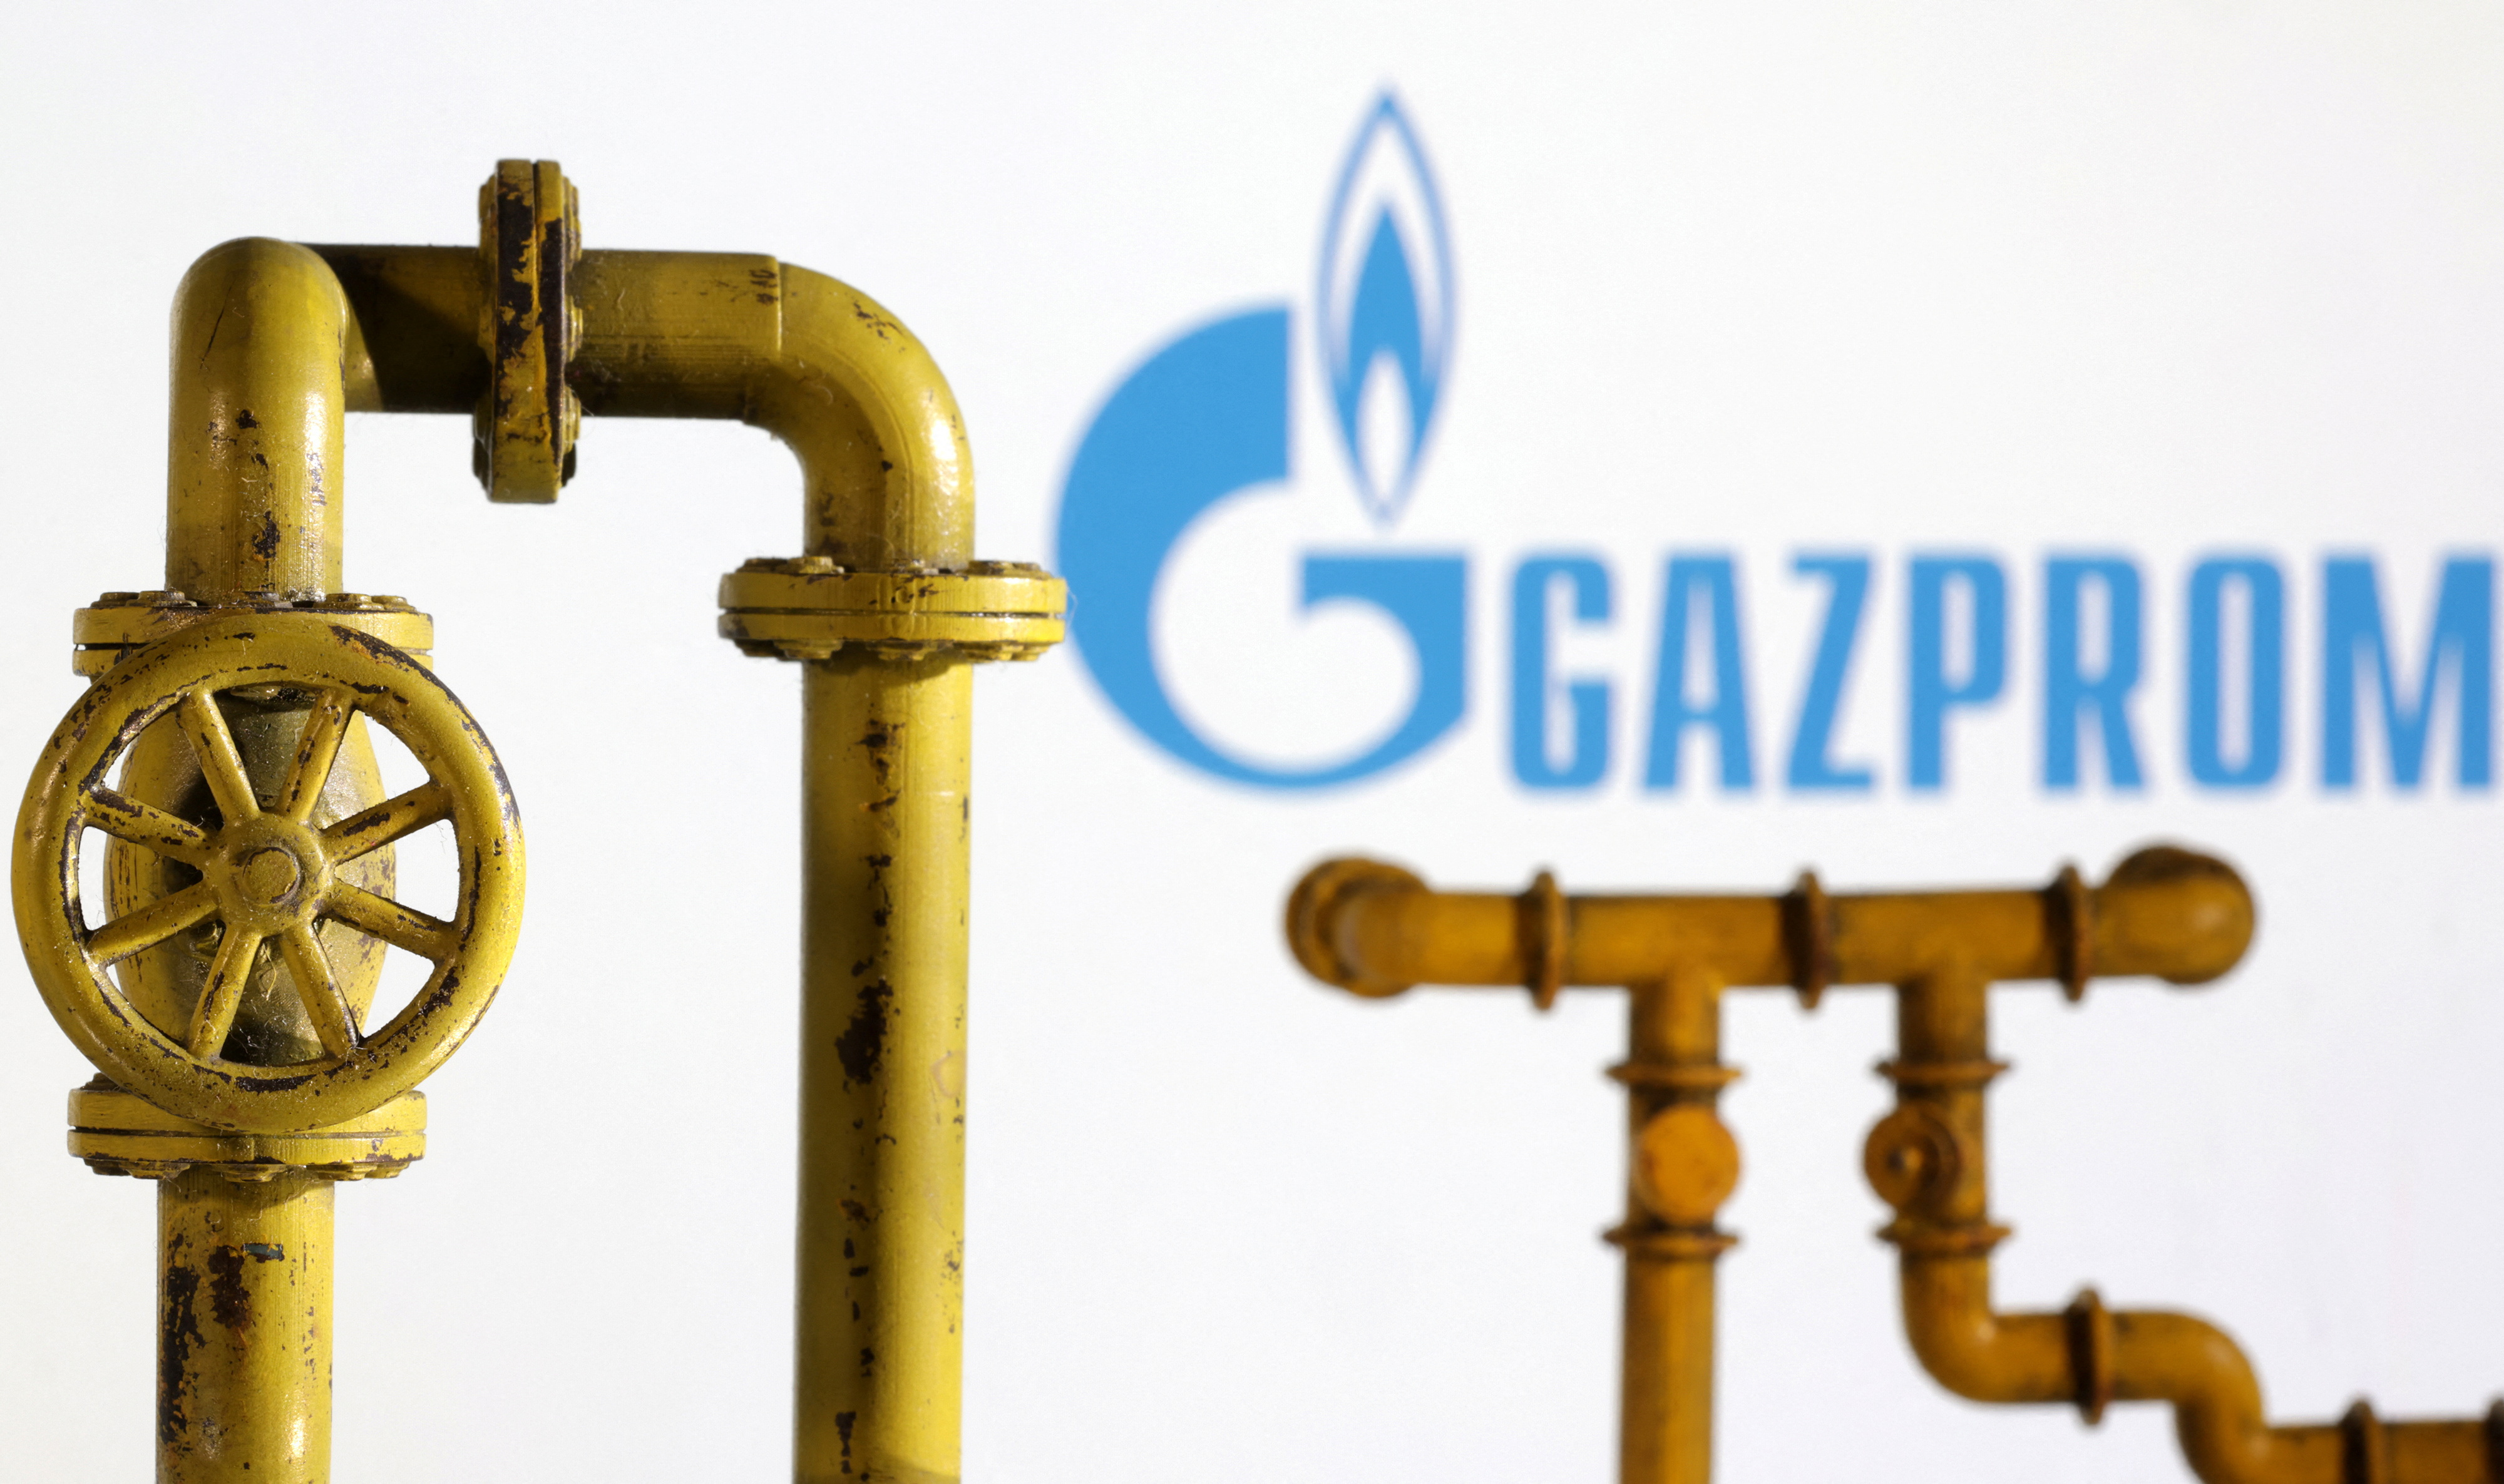 Illustration shows natural gas pipeline and Gazprom logo